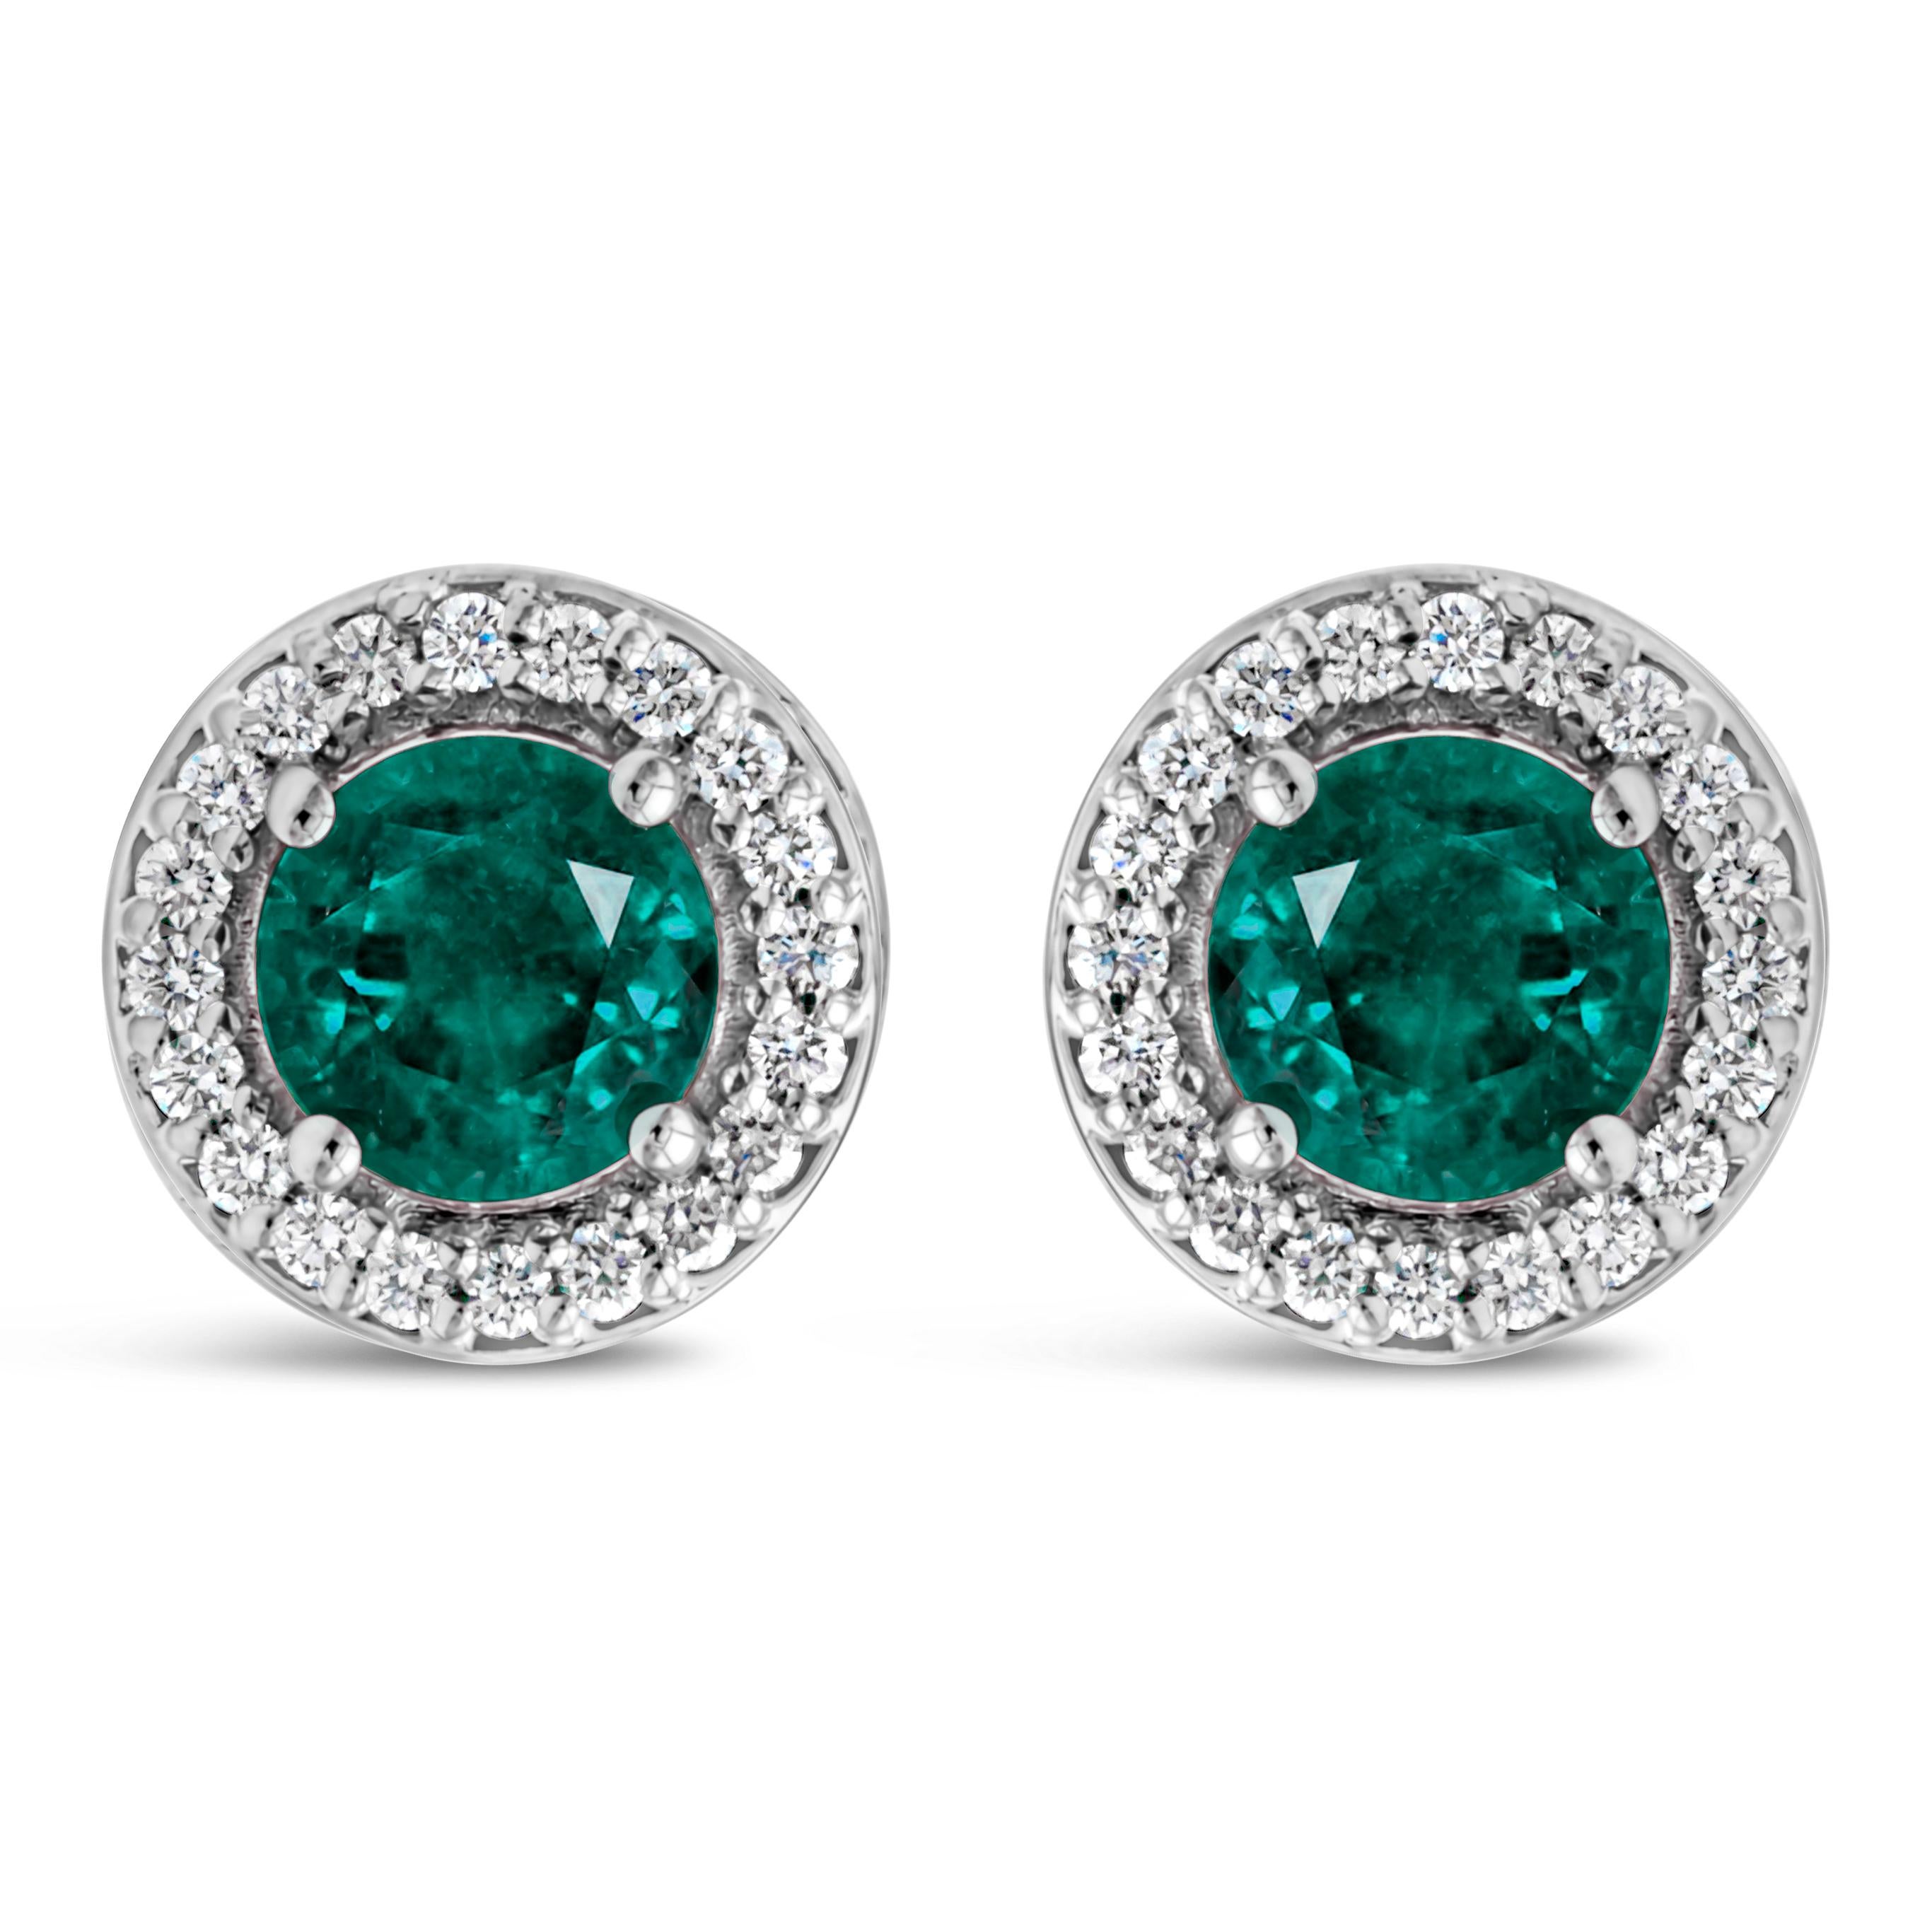 1.20 Carats Total Round Cut Green Emerald and Diamond Halo Stud Earrings For Sale